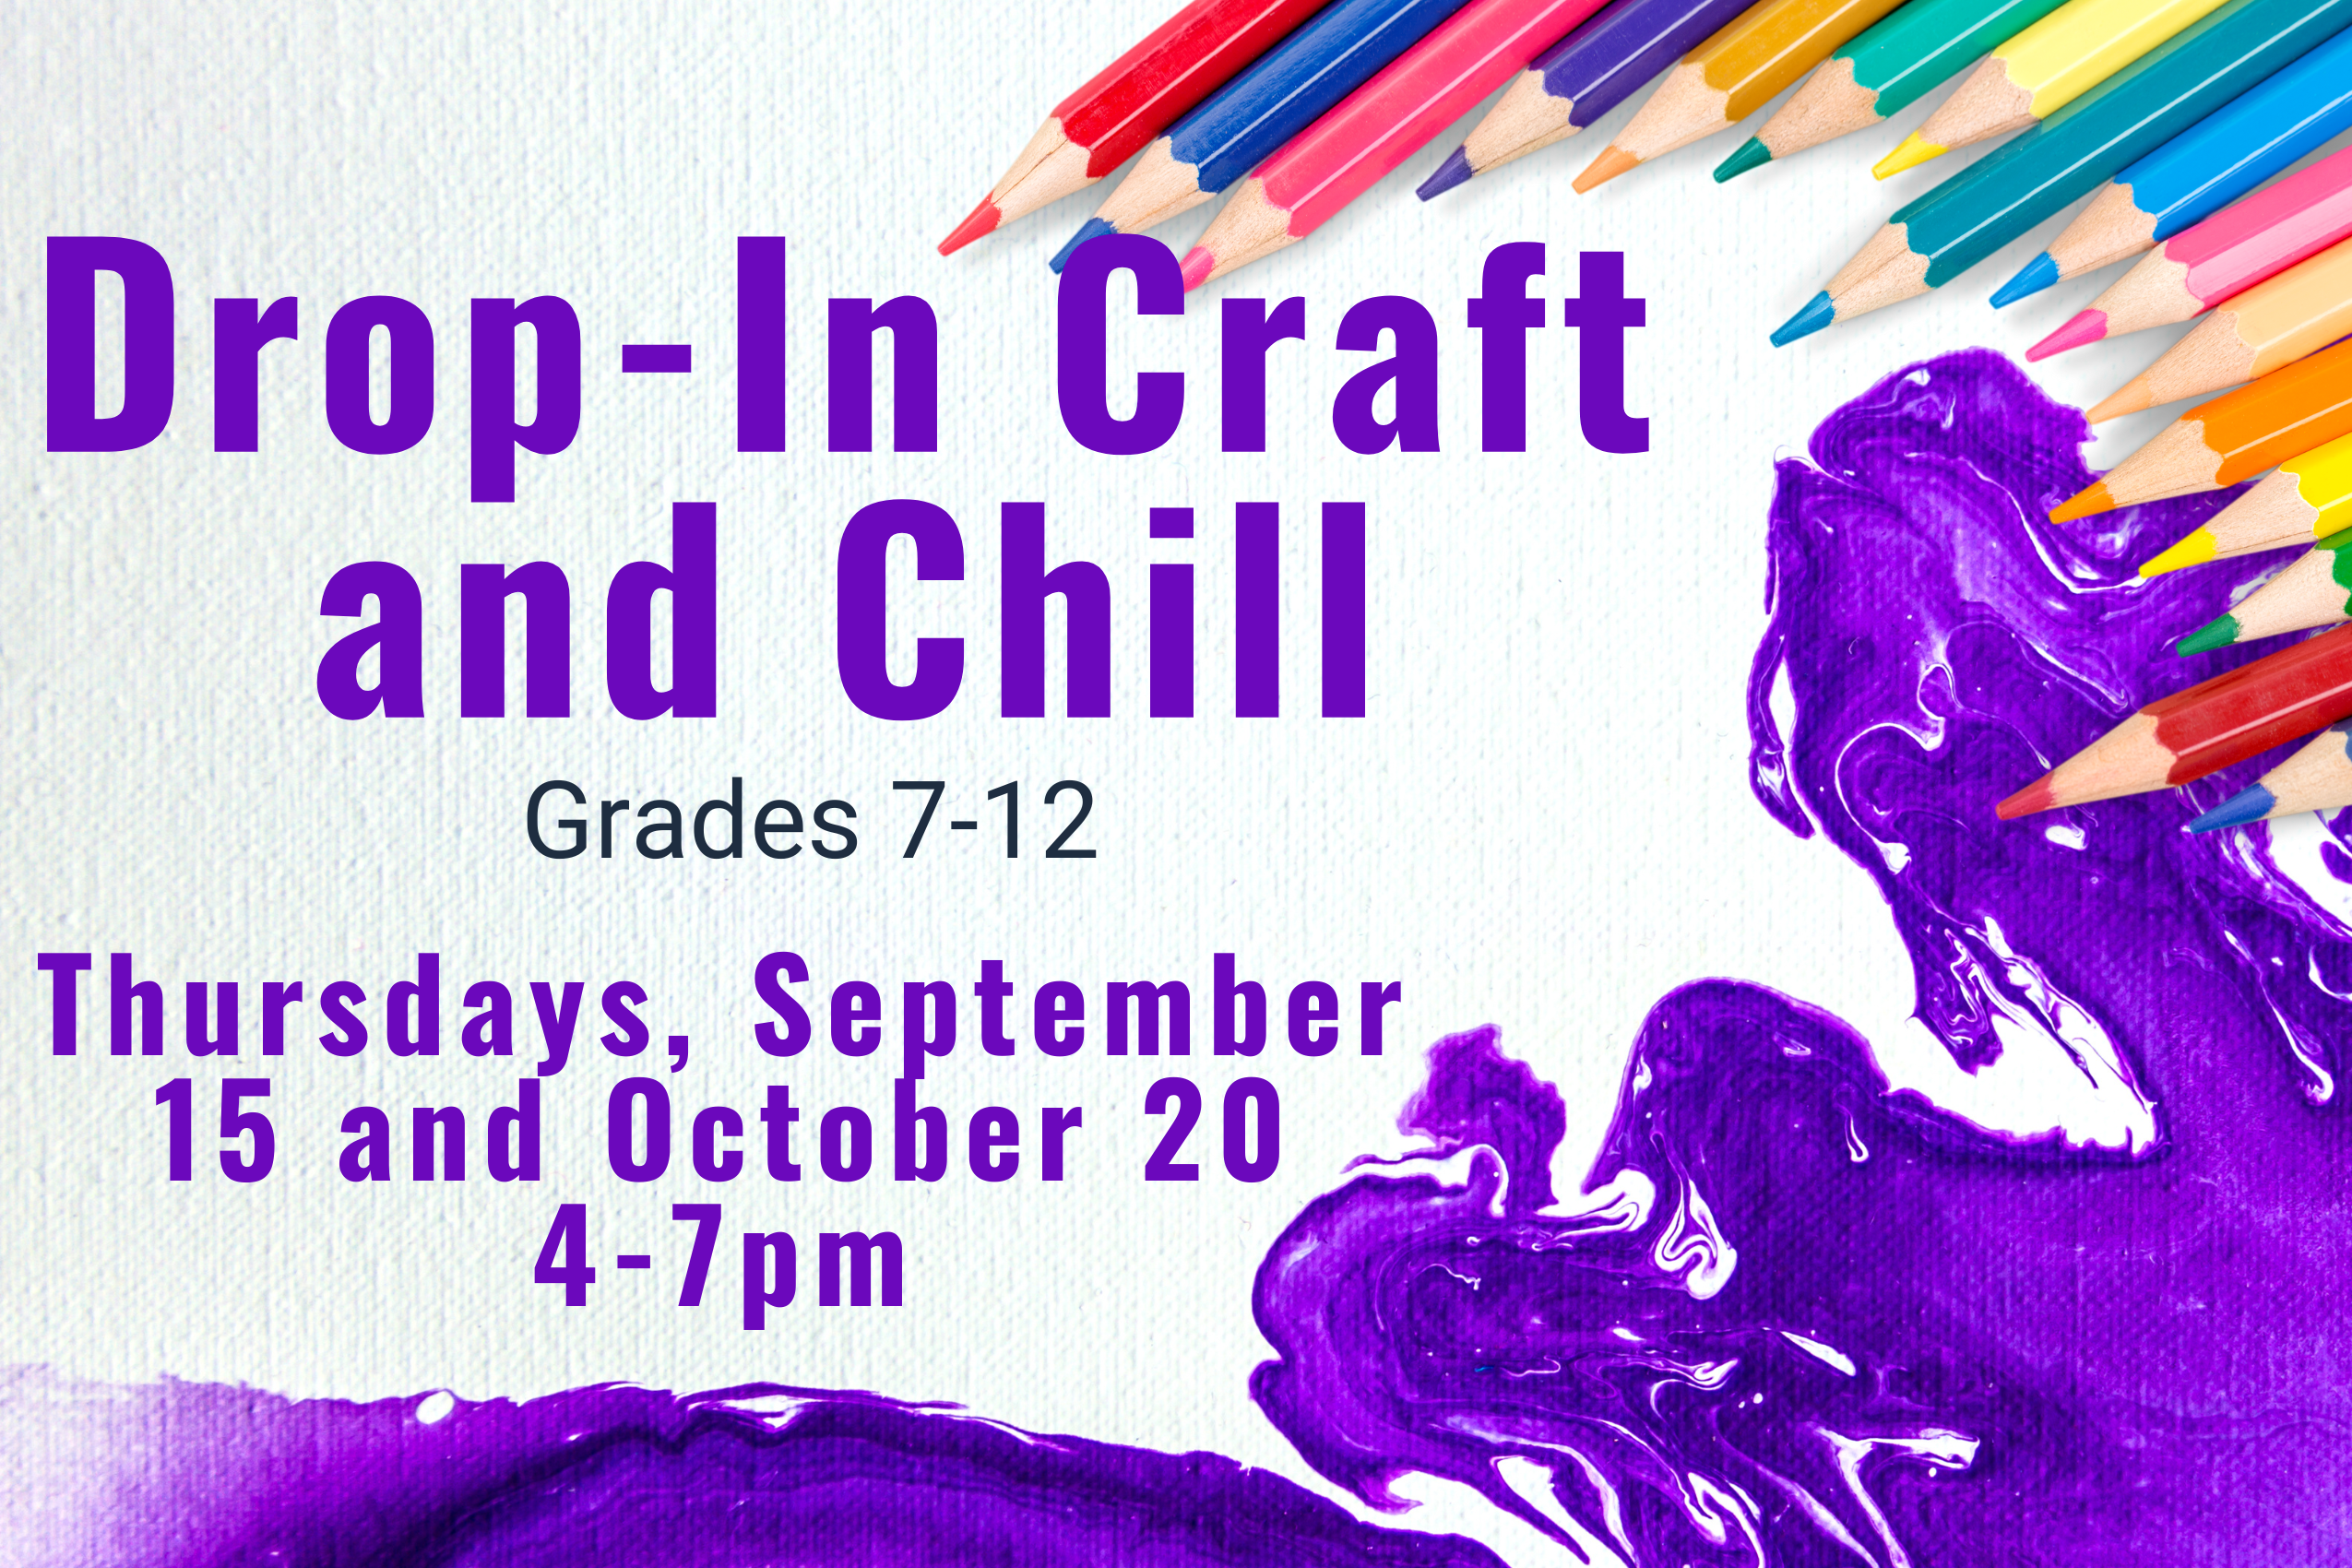 Program flyer with the following text, "Drop-In Craft and Chill. Grades 7-12. Thursdays, September 15 and October 20. 4:00-7:00pm."